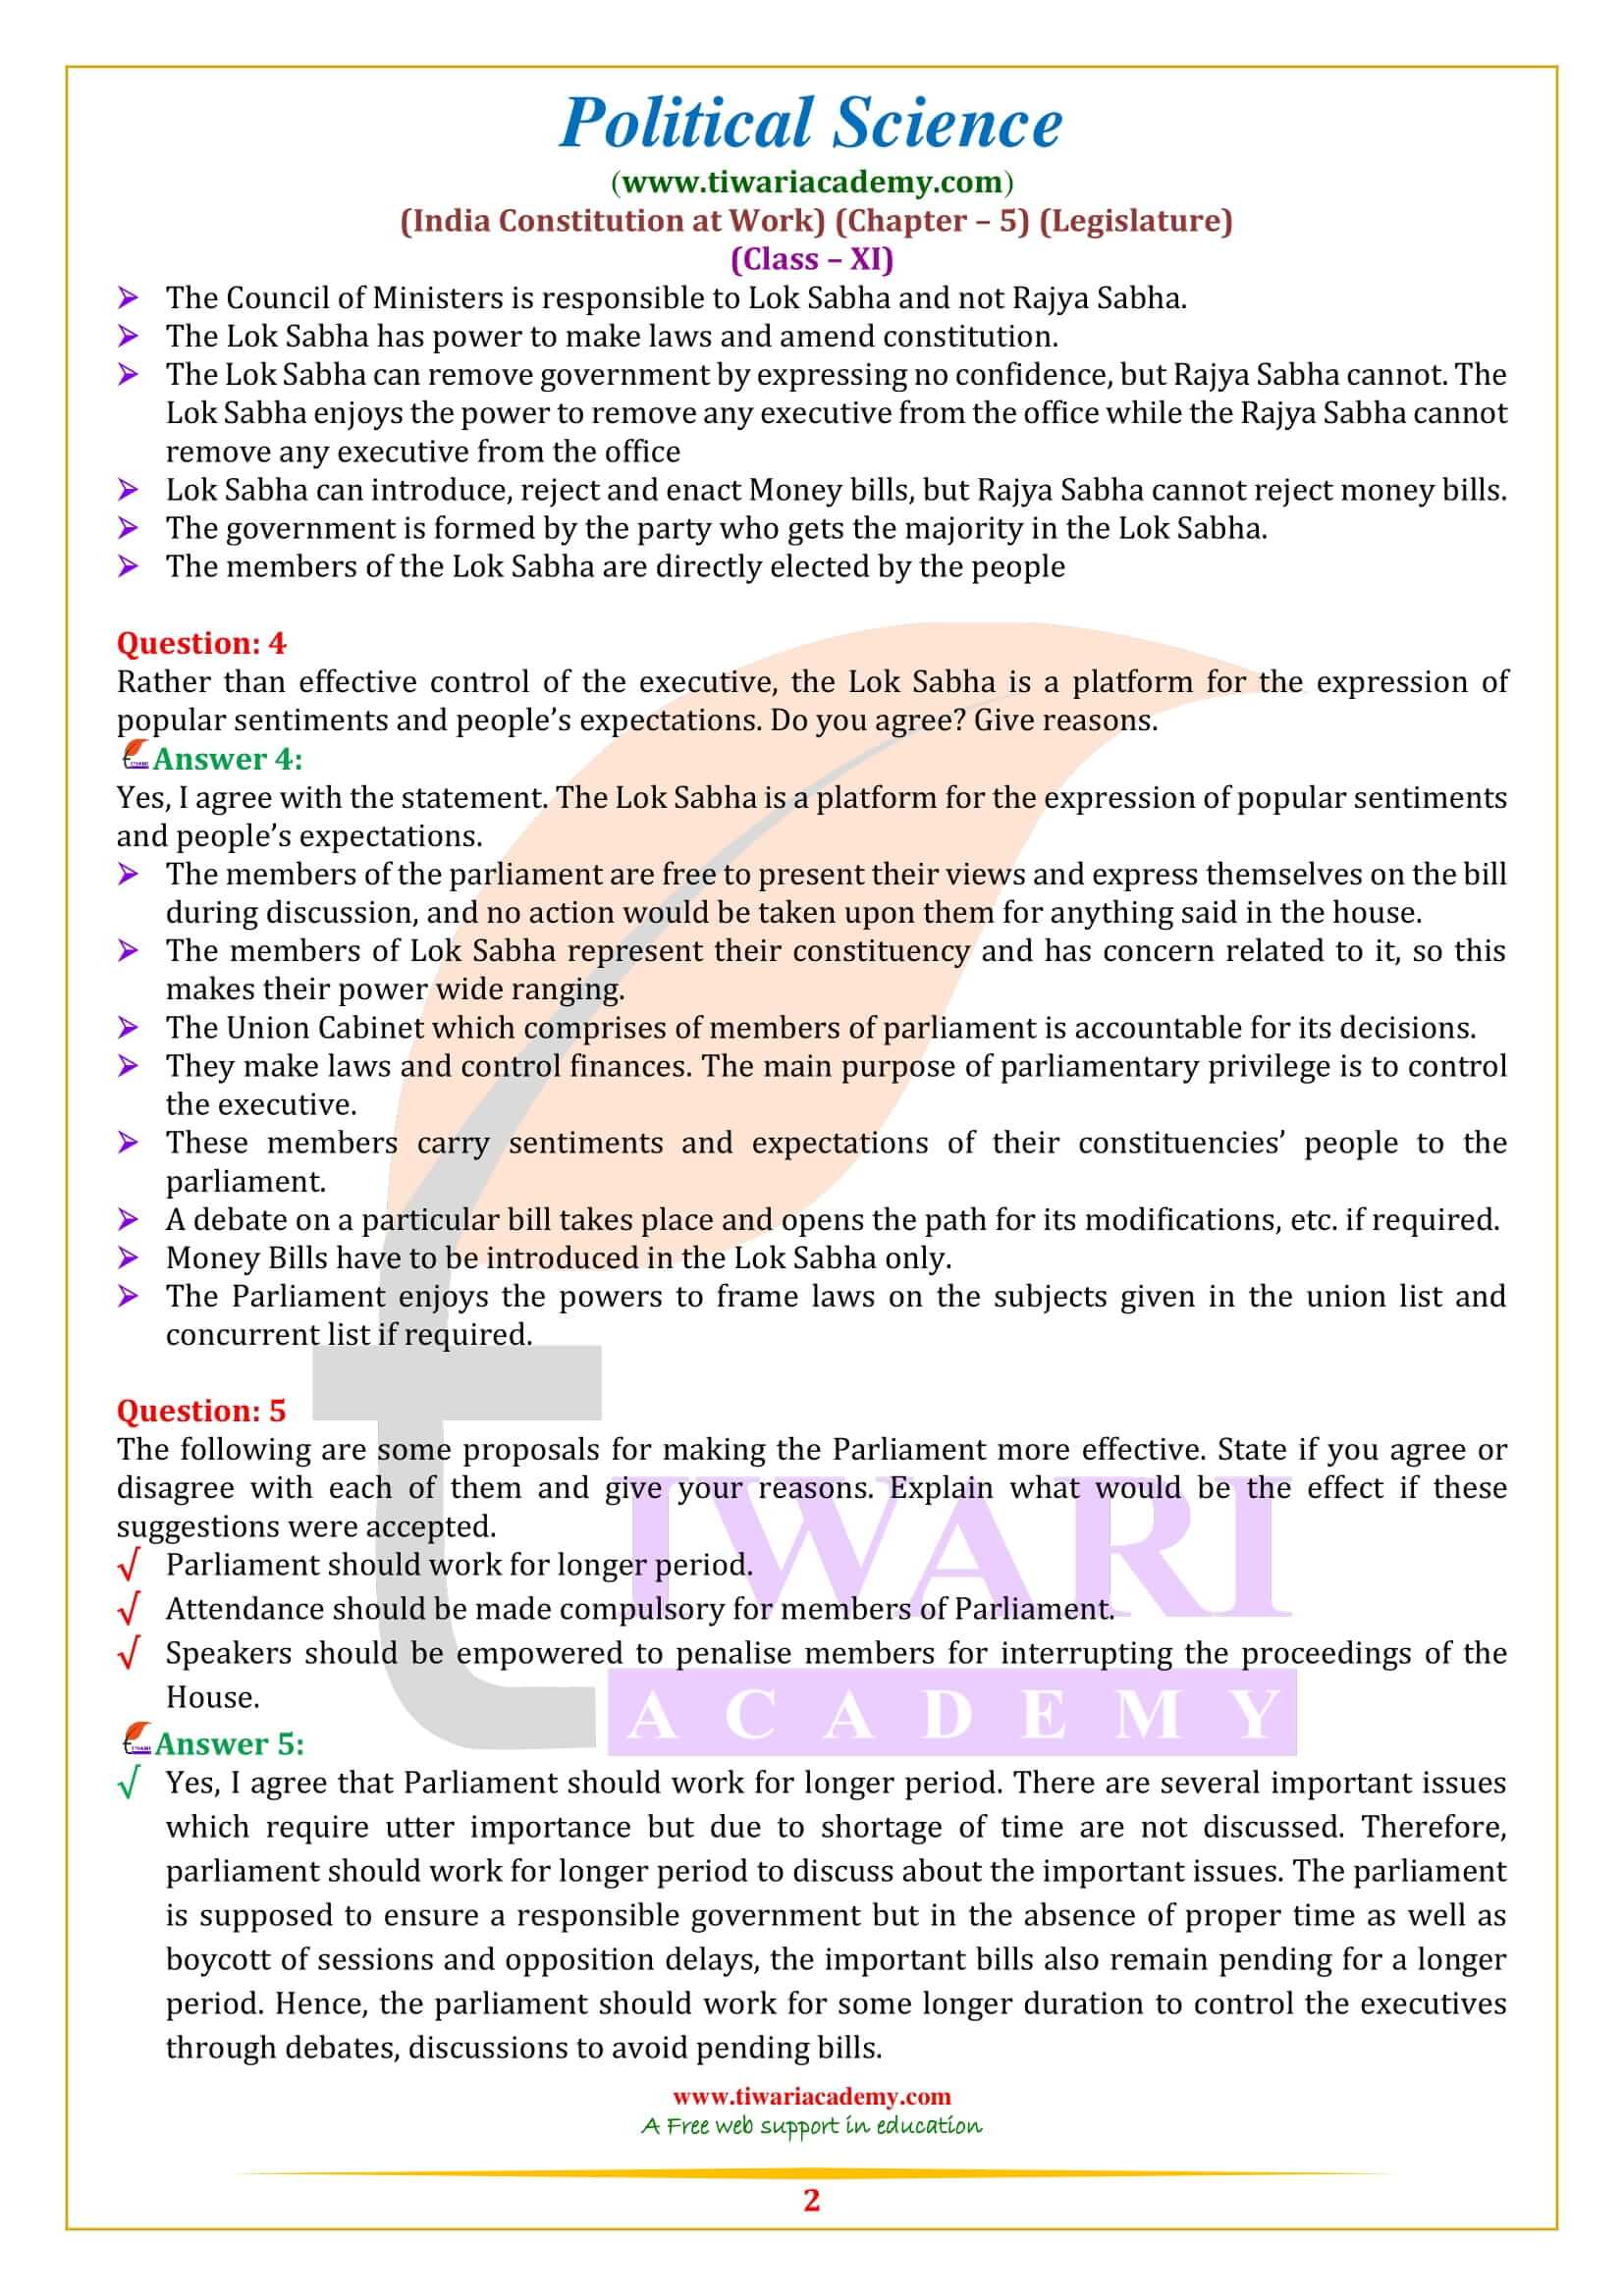 NCERT Solutions for Class 11 Political Science Chapter 5